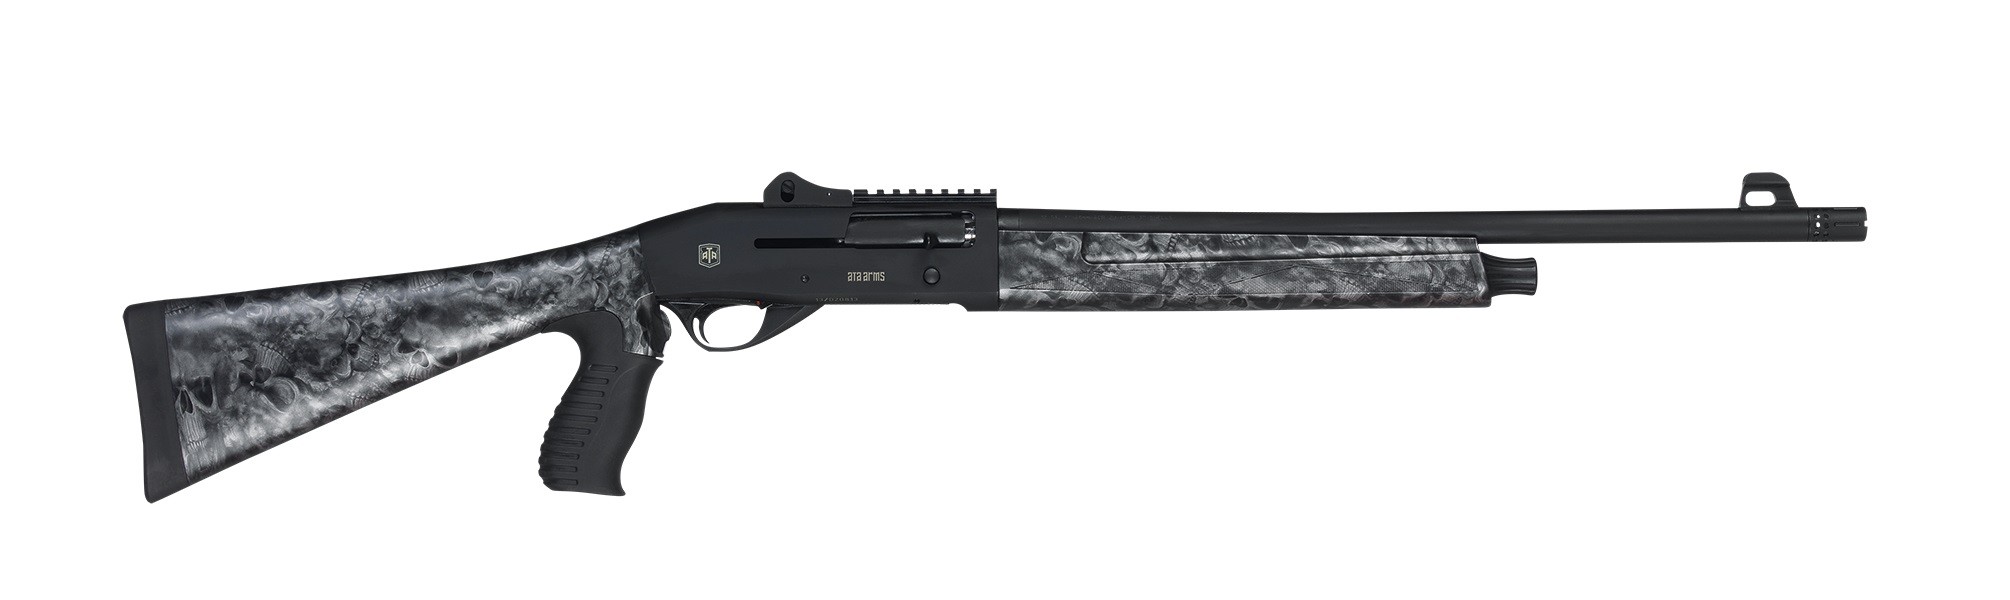 Ружье Ata Arms Neo 12 Tactical Skull 12x76 - фото 1